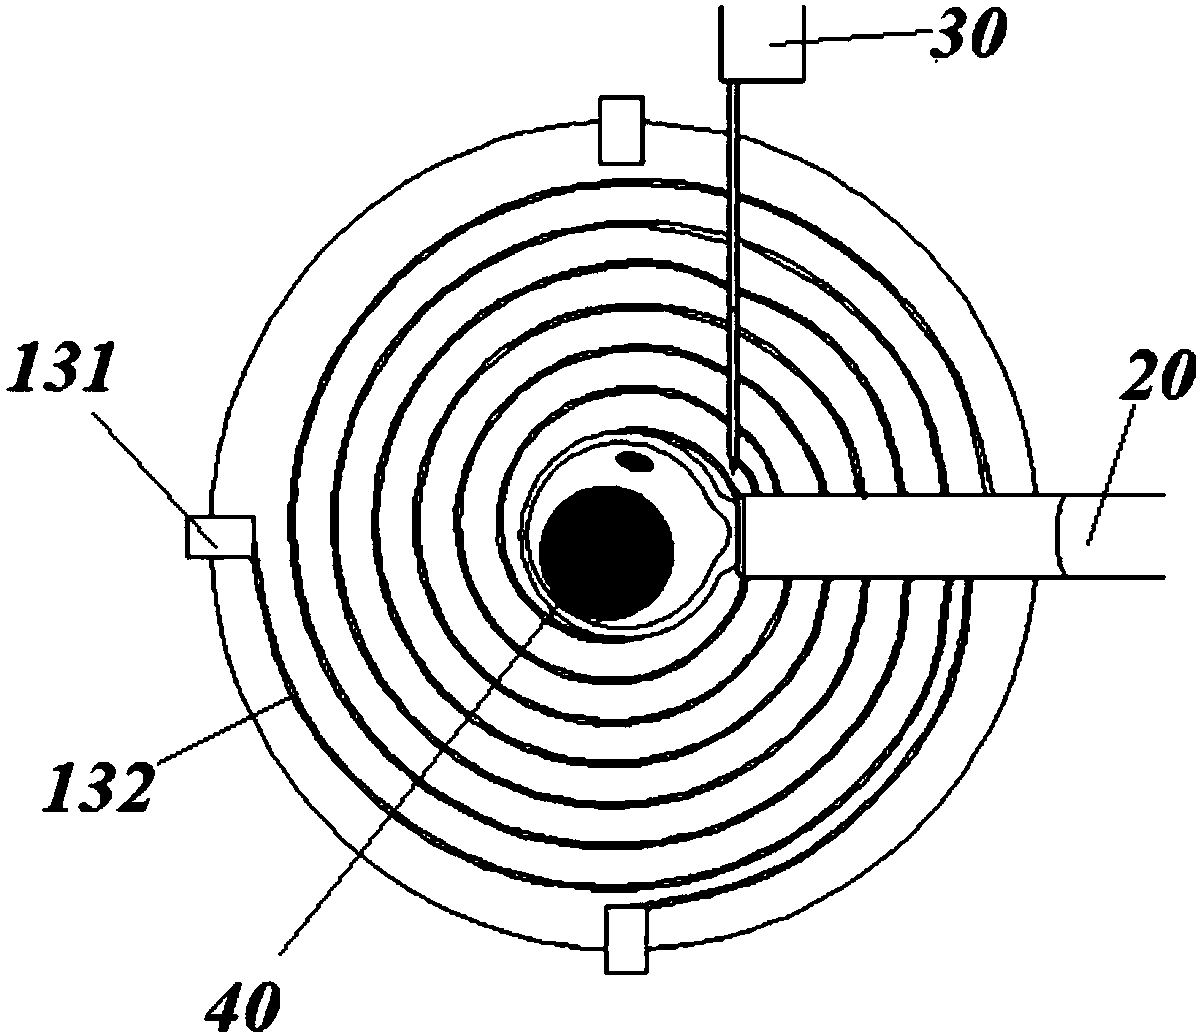 Piezoelectric ultrasonic cutting system and method for oocyte zona pellucida